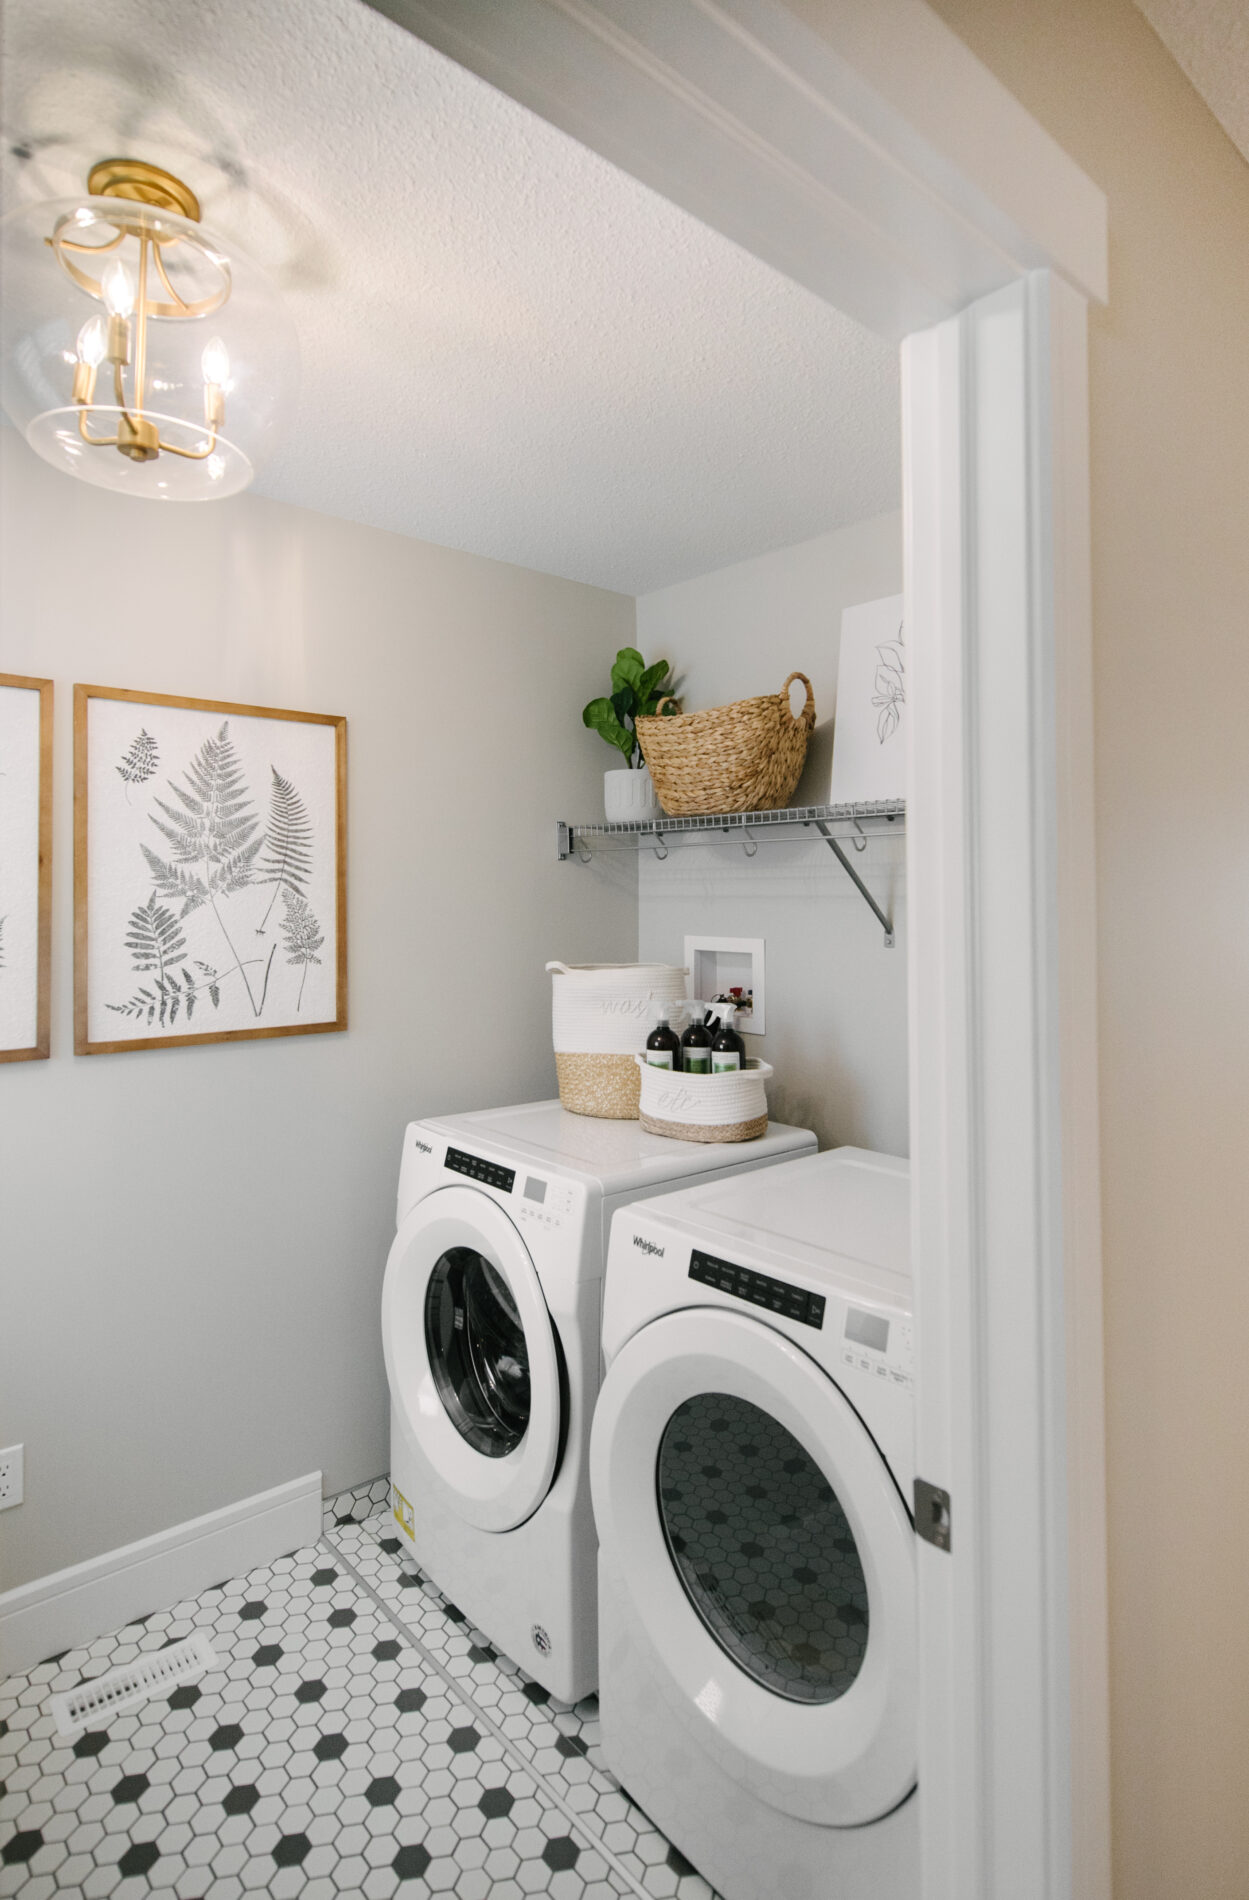 A bright laundry room with black and white patterned floor tile, front load appliances, a shelf above and some accessories in natural finishes such as wood and wicker